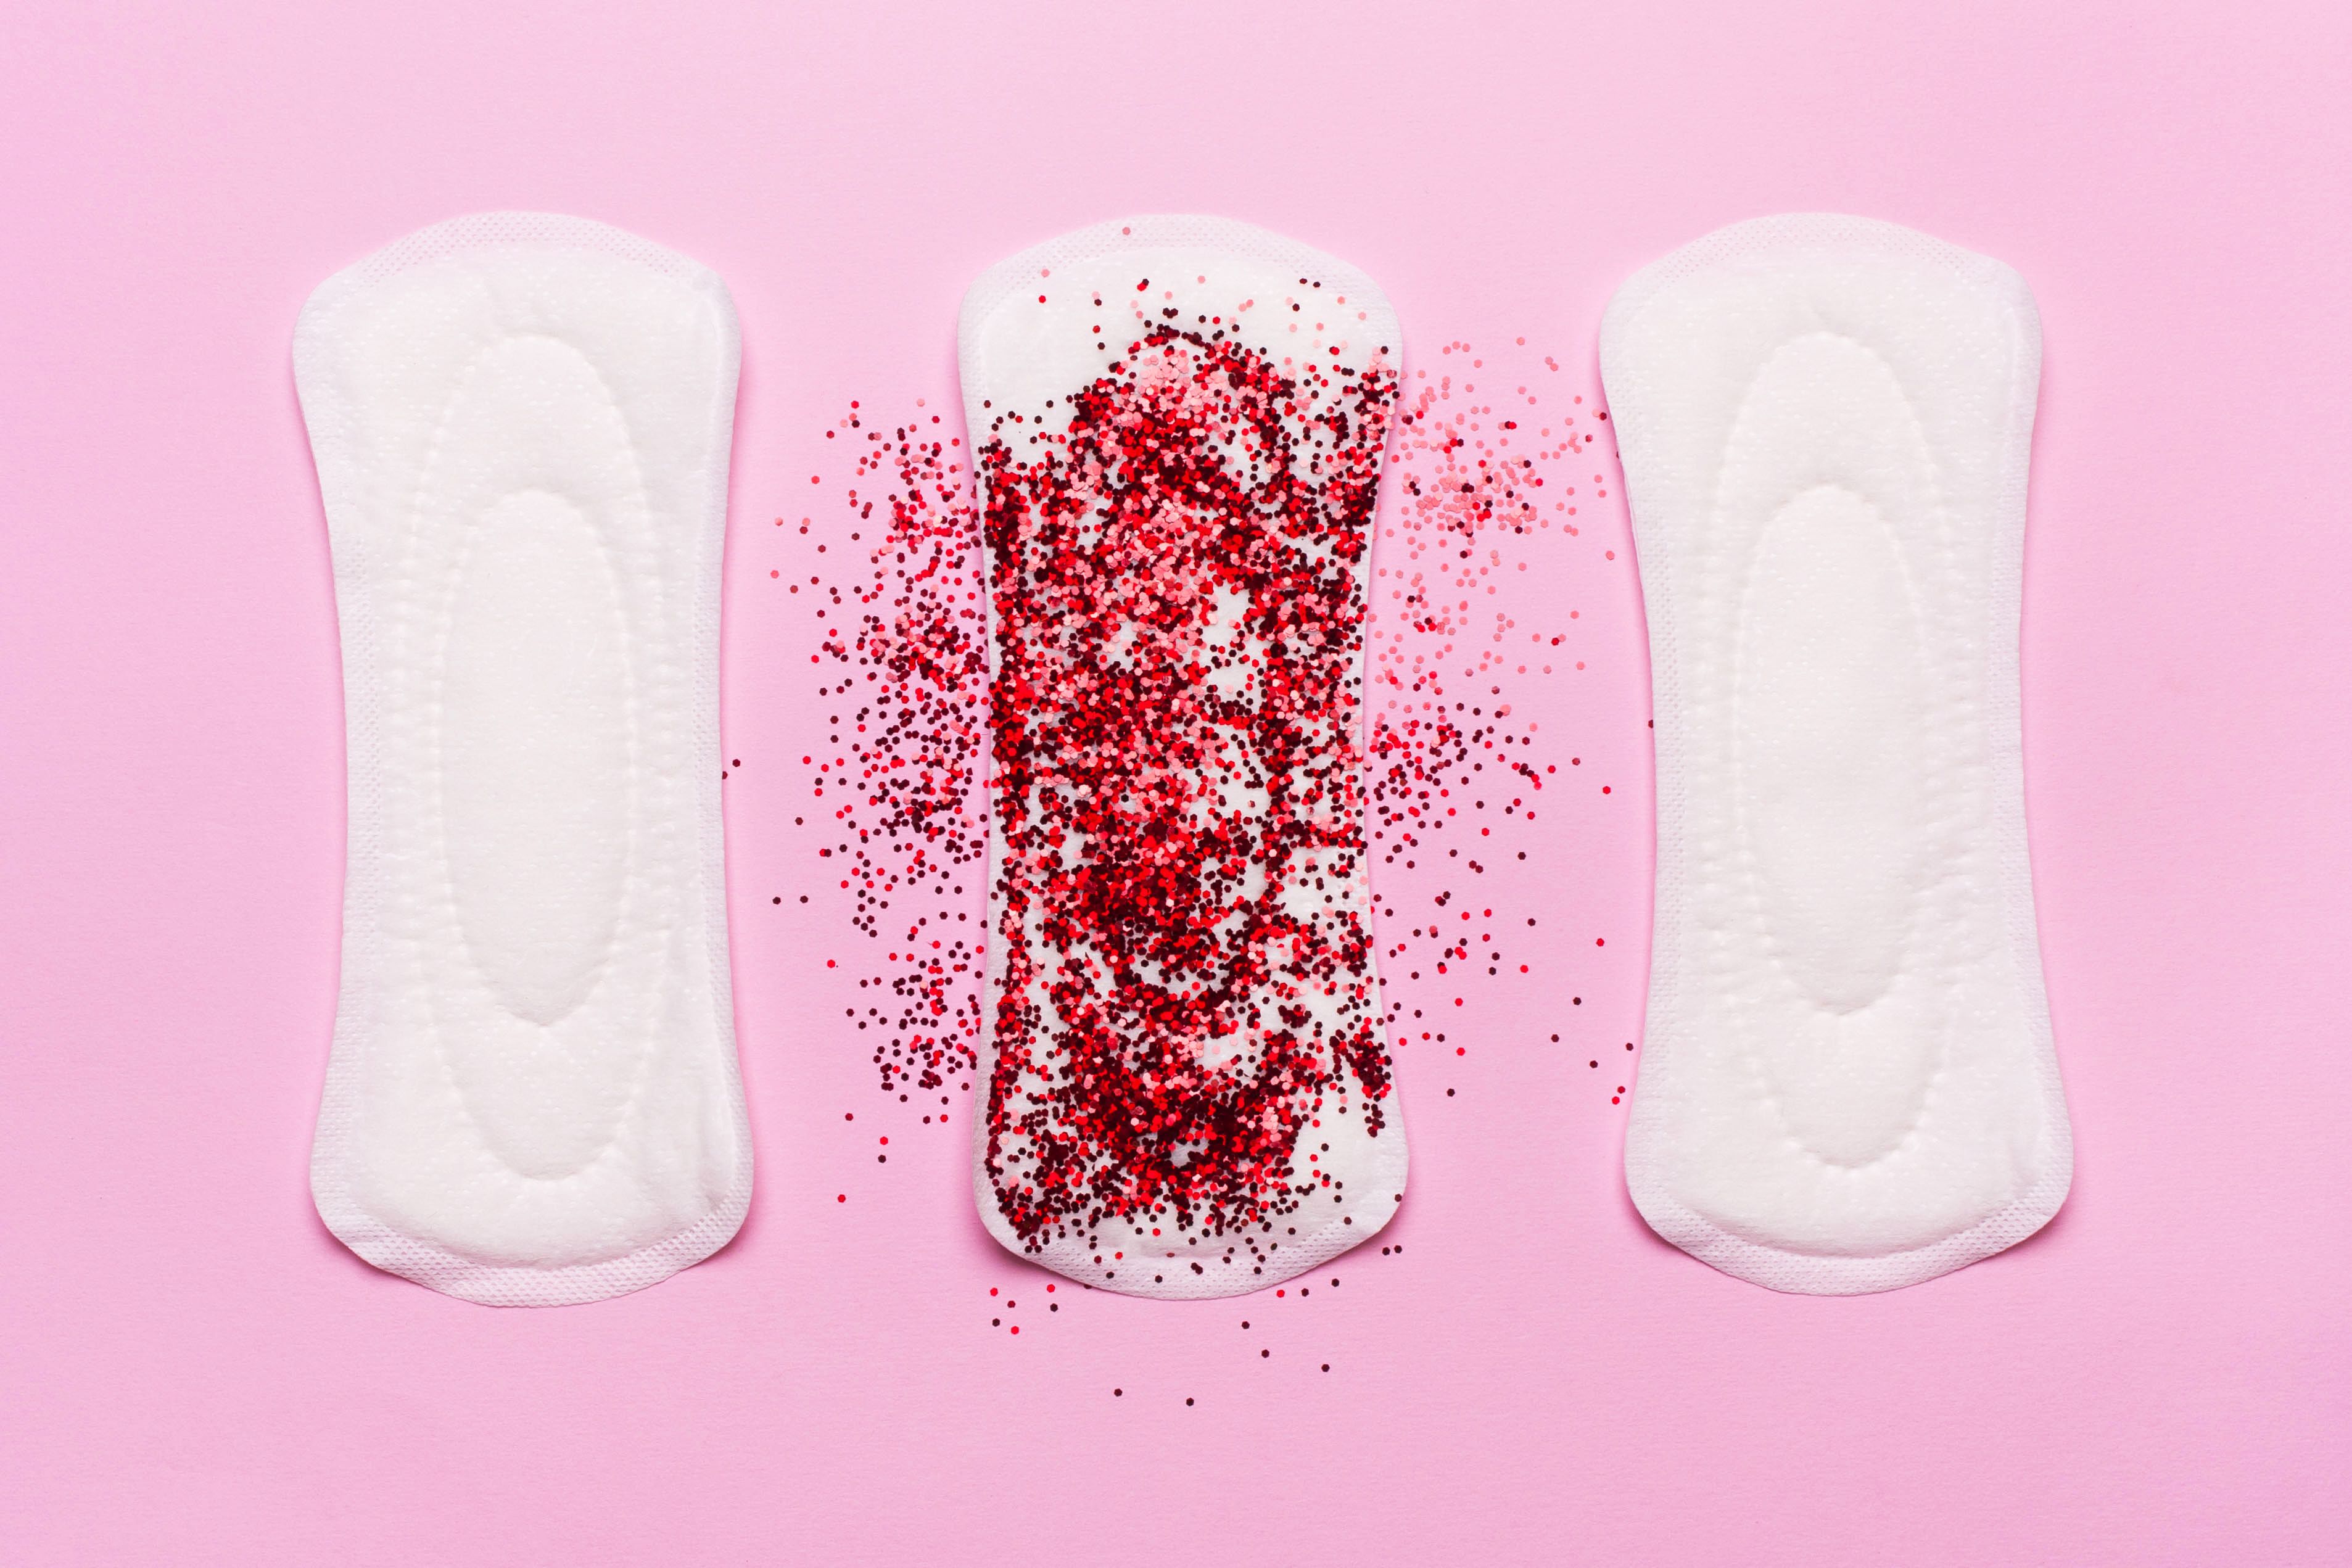 Your Period Doesn't Stop in Water: What to Use, Other Myths and